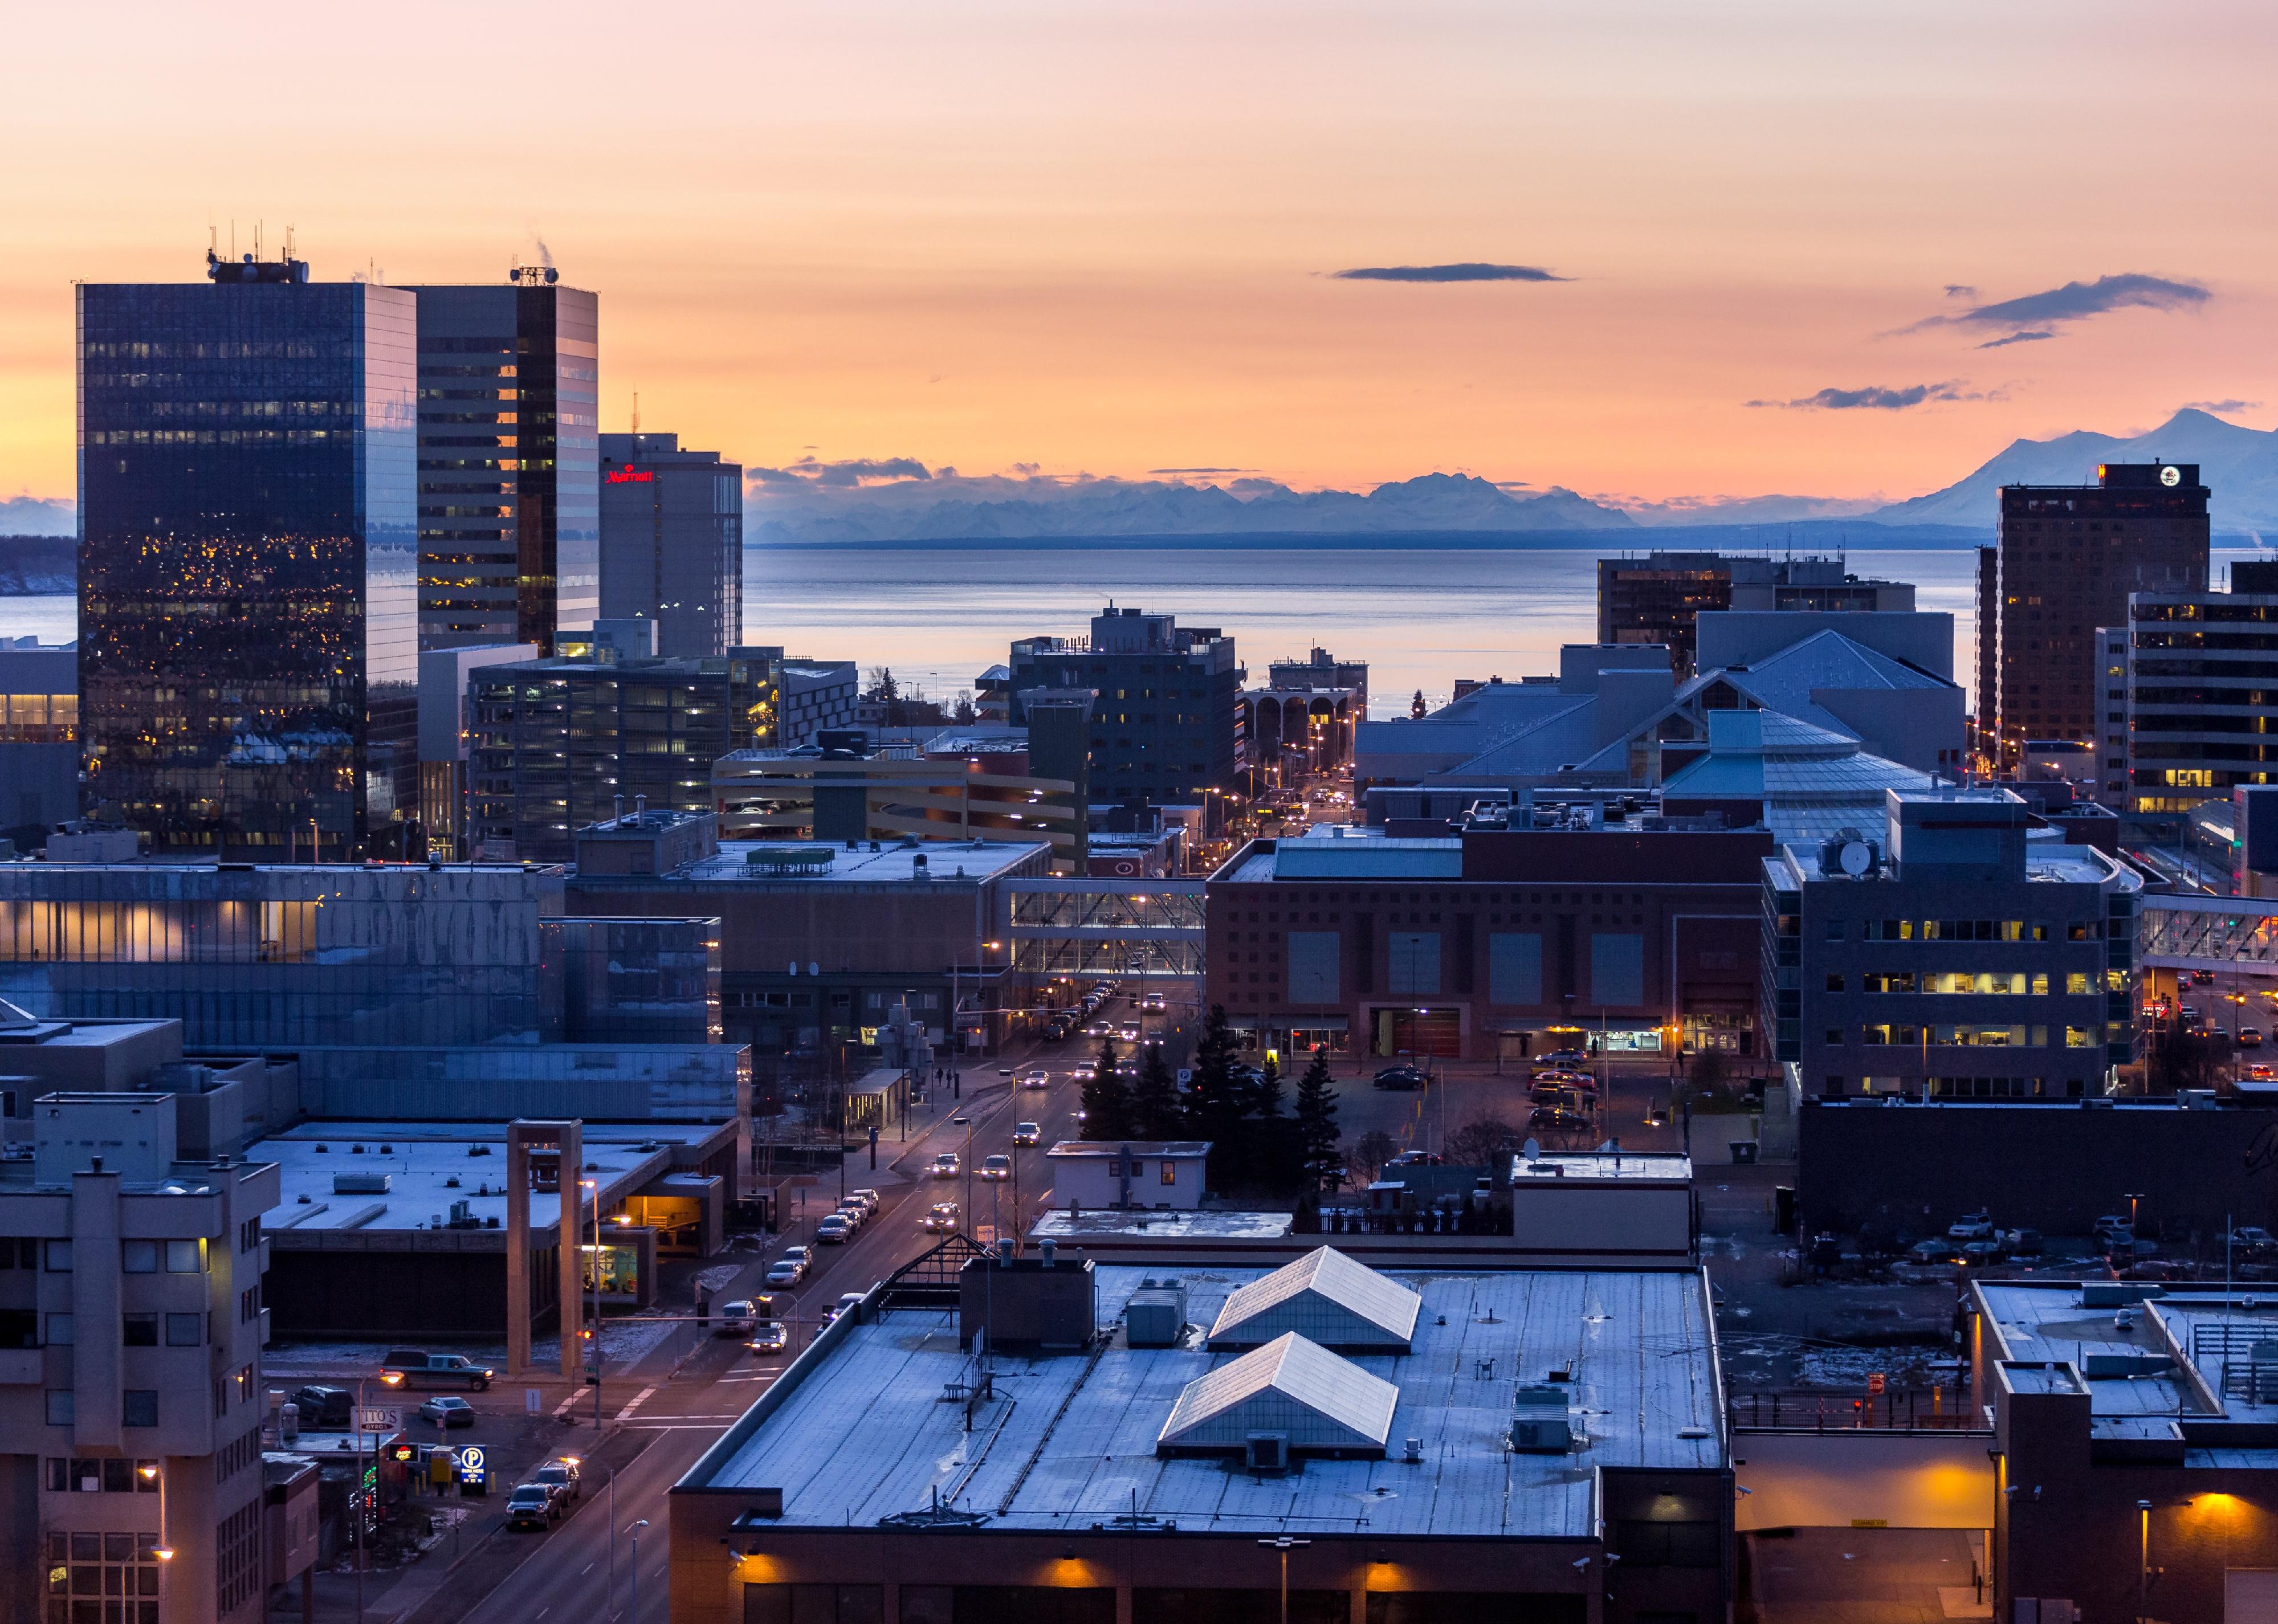 Downtown Anchorage, Alaska city skyline at twilight time during winter.